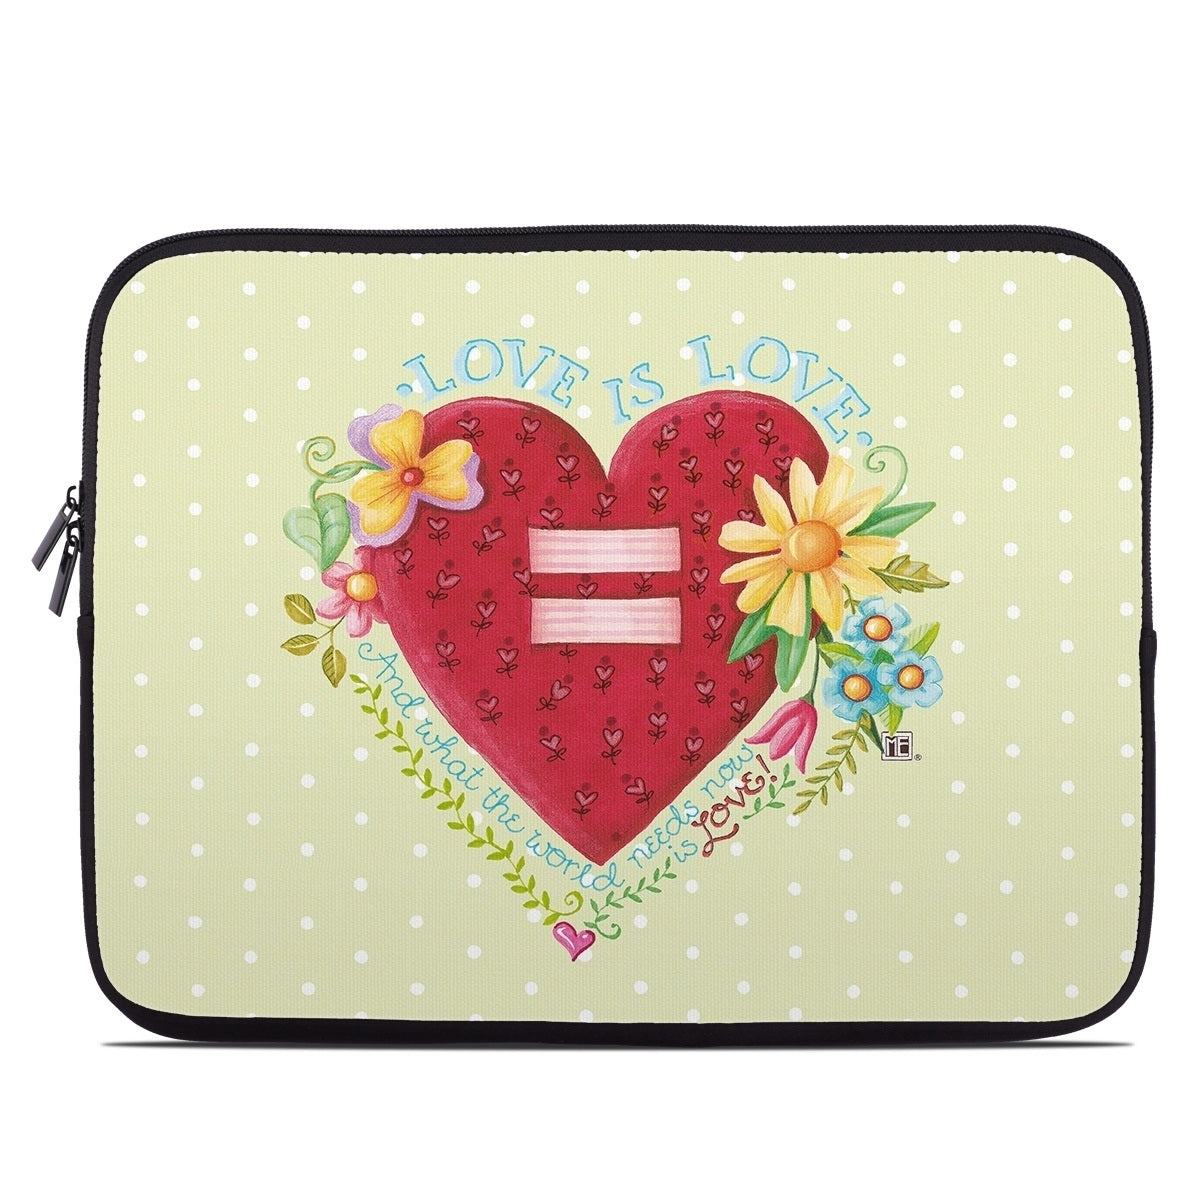 Love Is What We Need - Laptop Sleeve